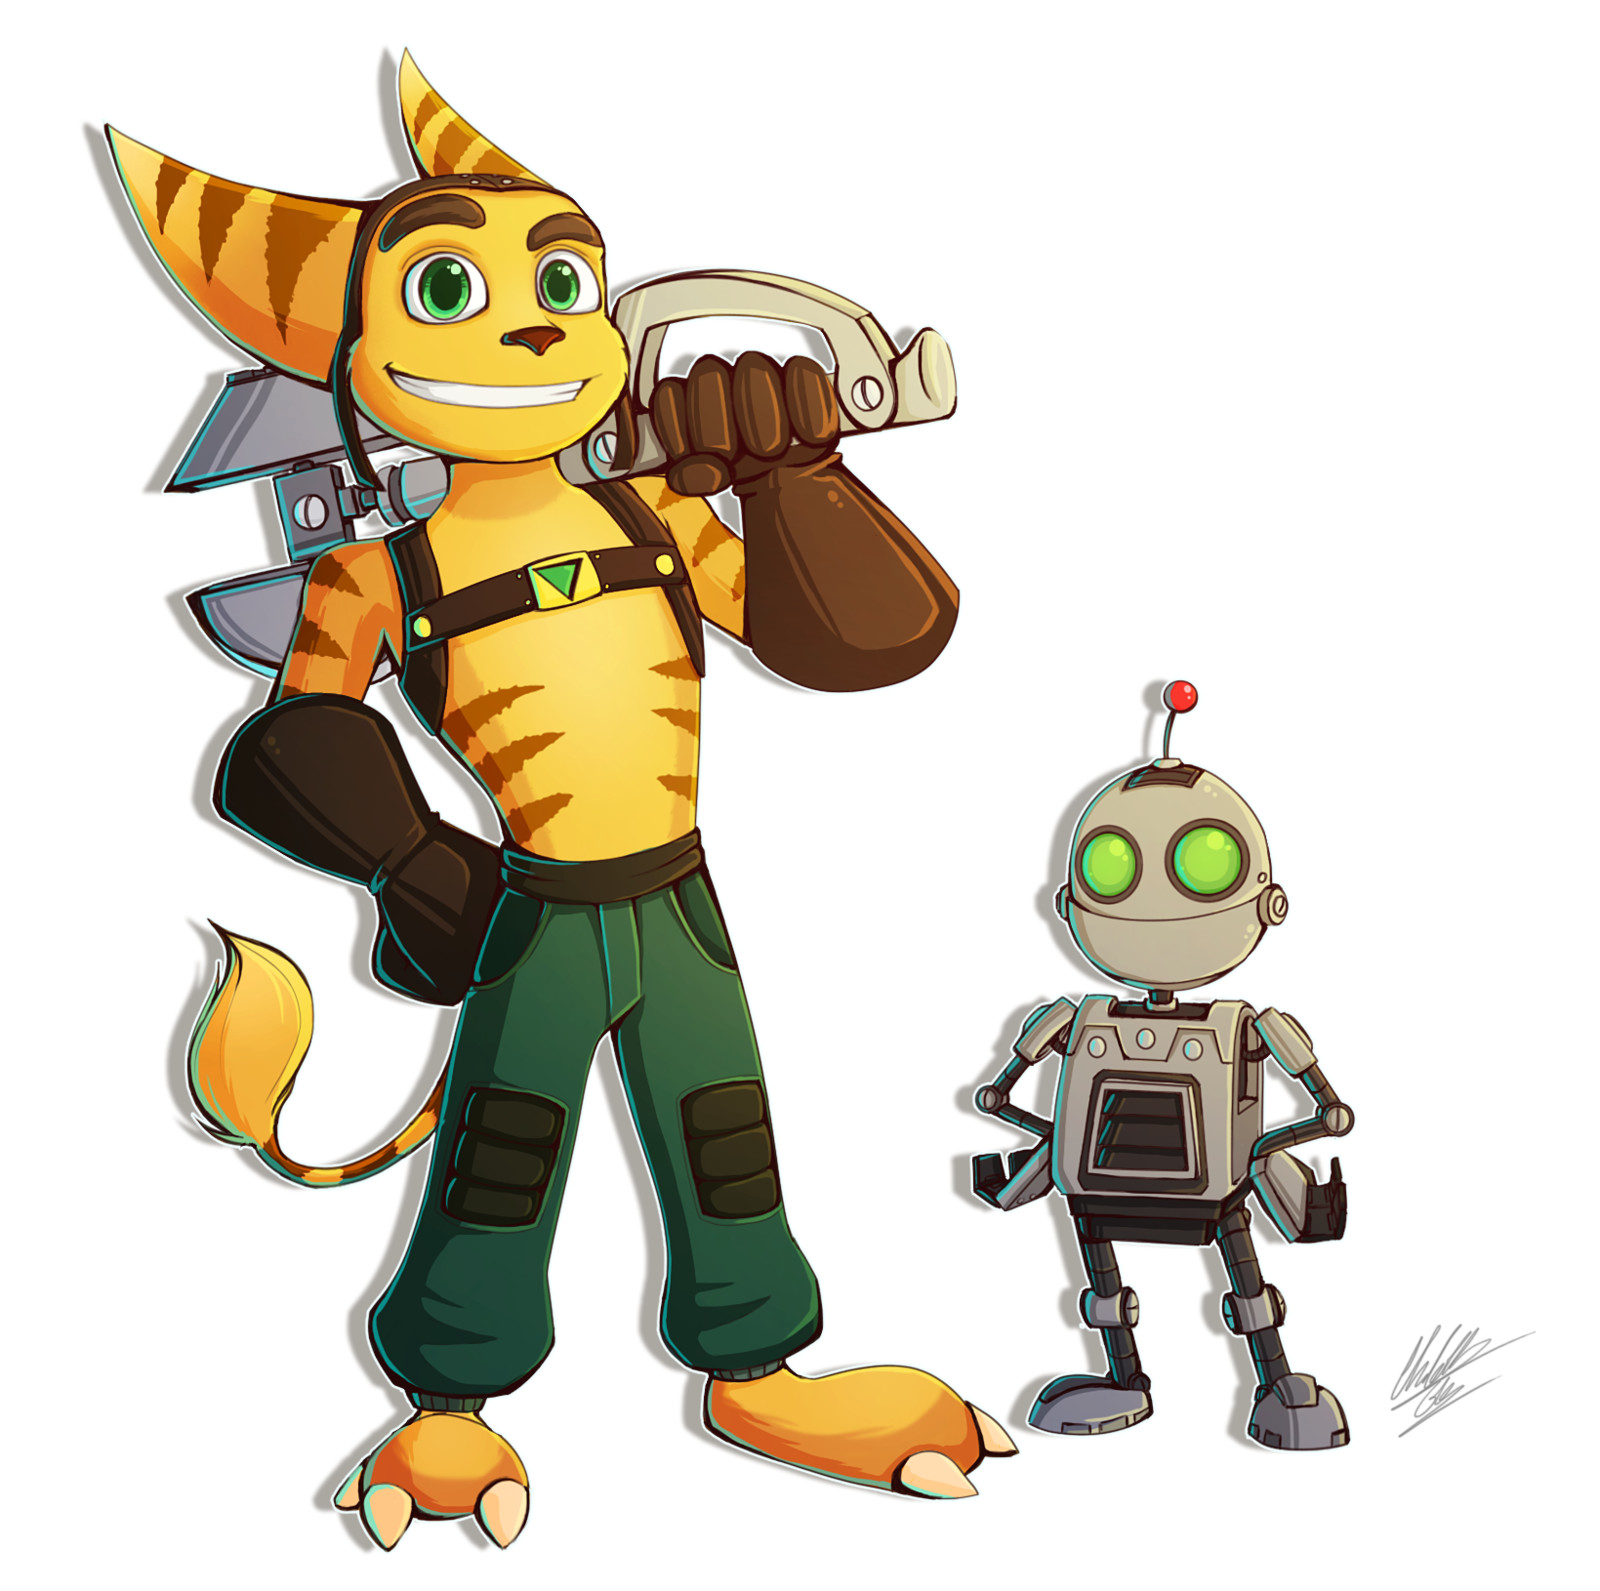 Ratchet and Clank Speedpaint: https://www.youtube.com/watch?v=t5A2BOZJT-0.